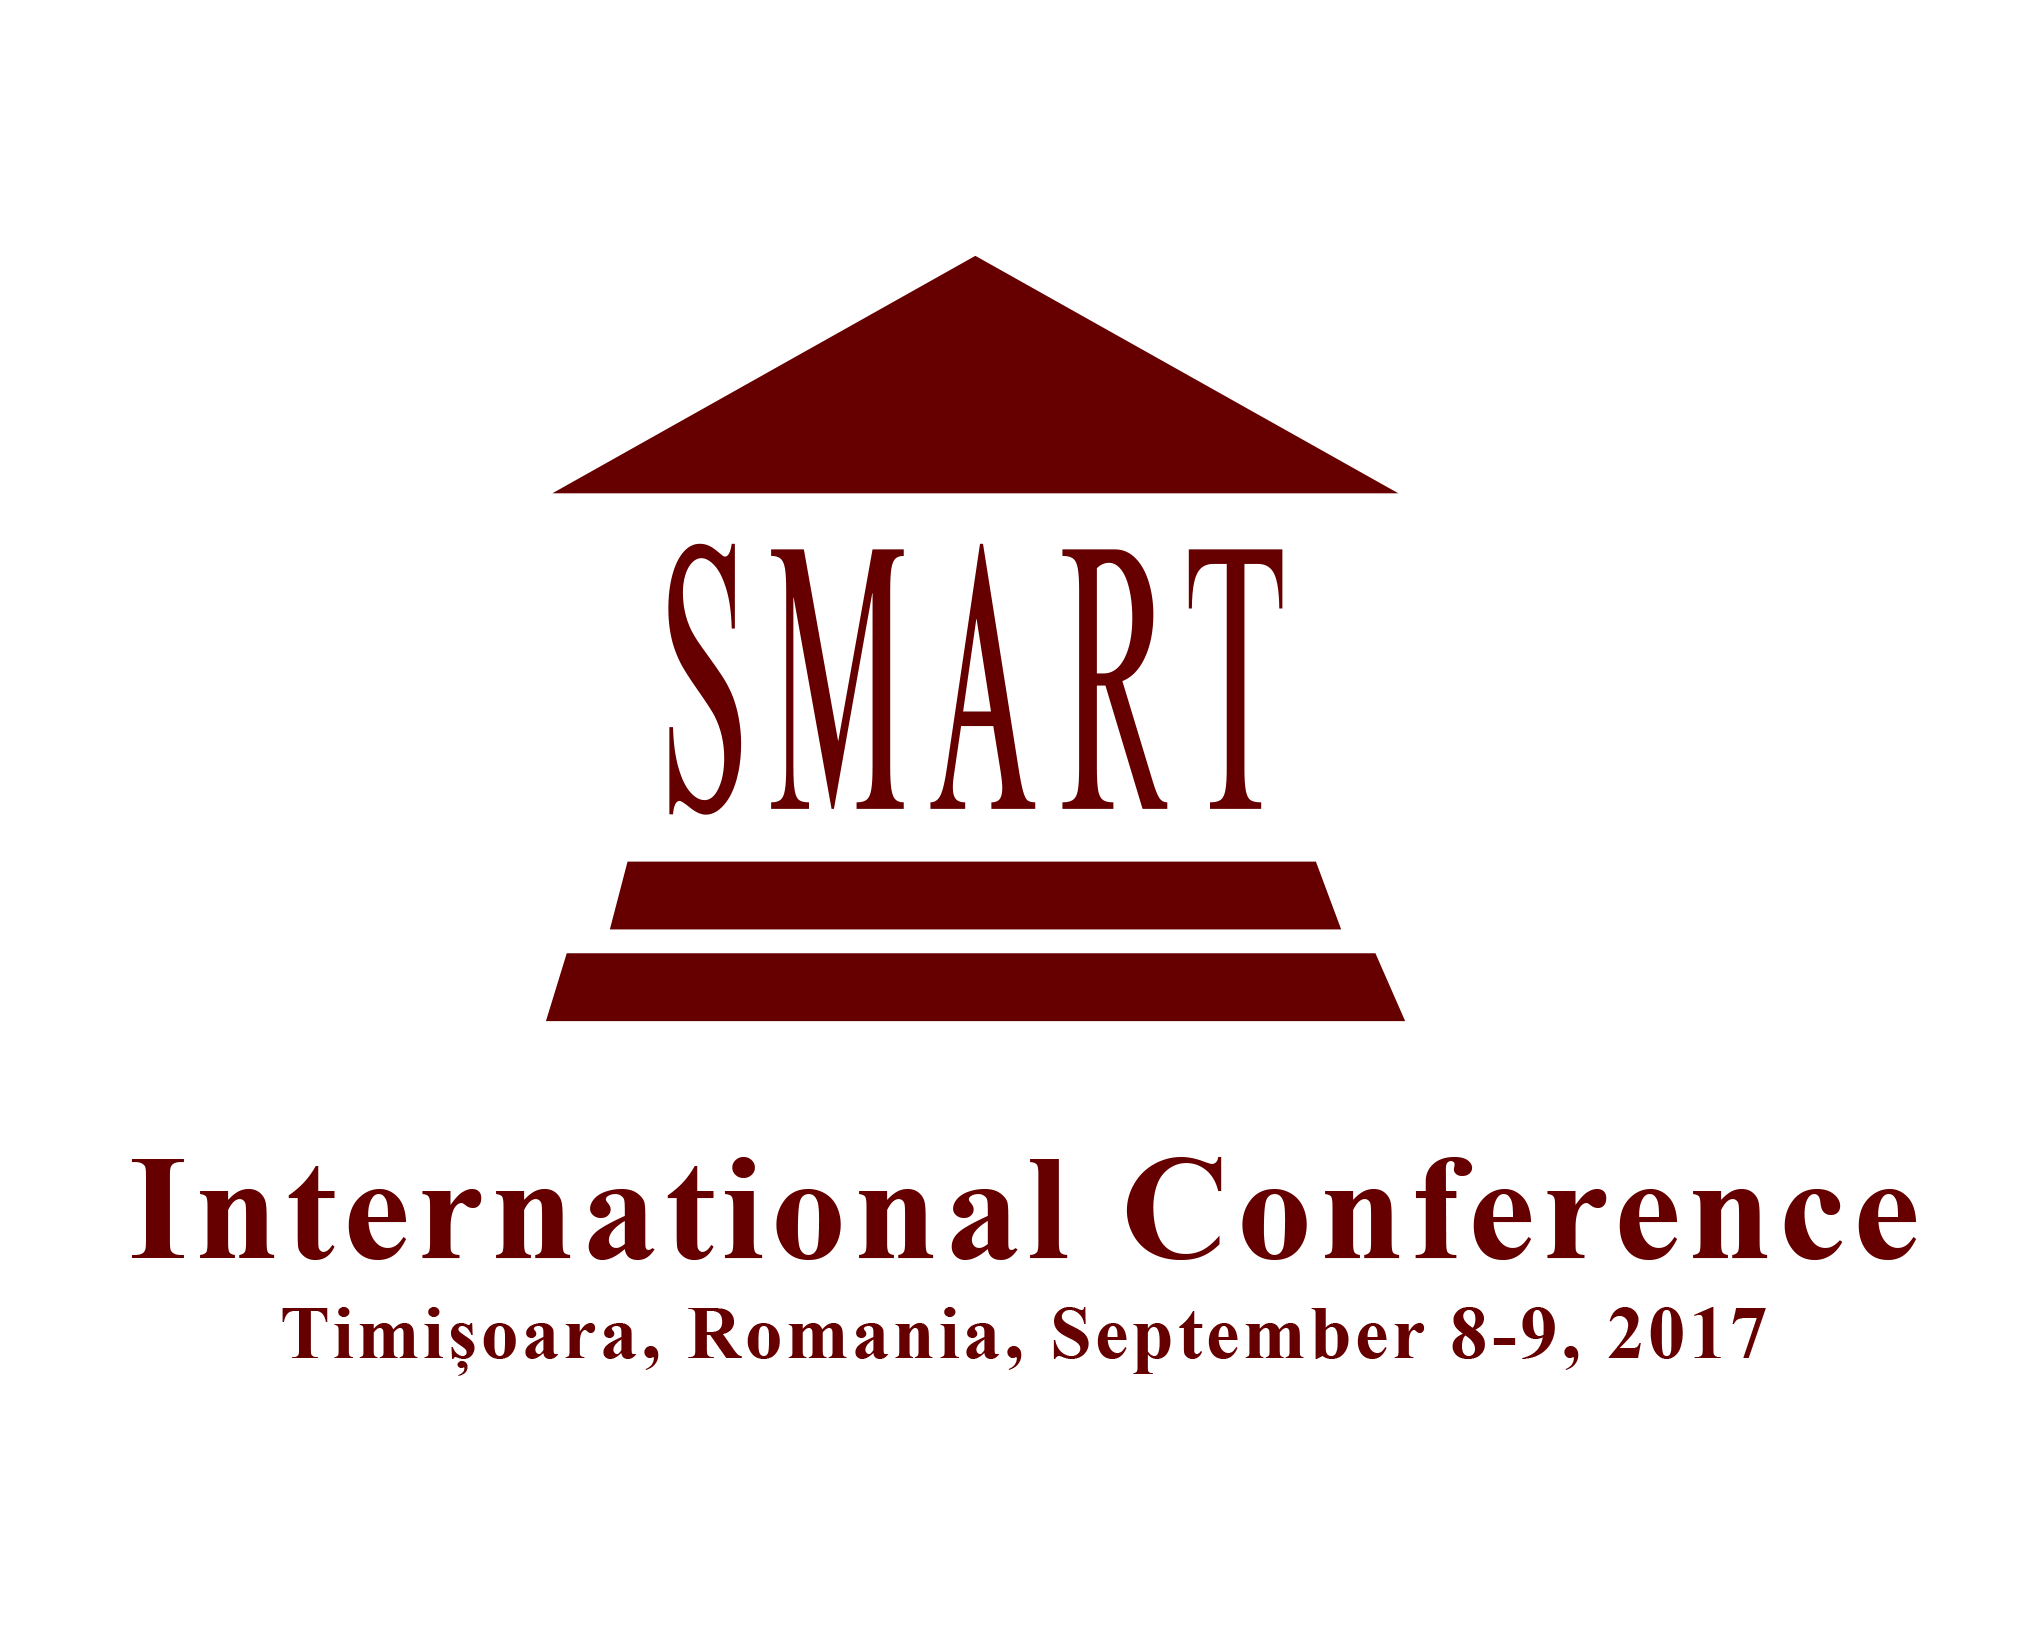 SMART 2017 - Scientific Methods in Academic Research and Teaching is an international conference that brings together specialists in Artificial Intelligence, Neuroscience, Cognitive Science, Computer Science, Social Media, and Education. 